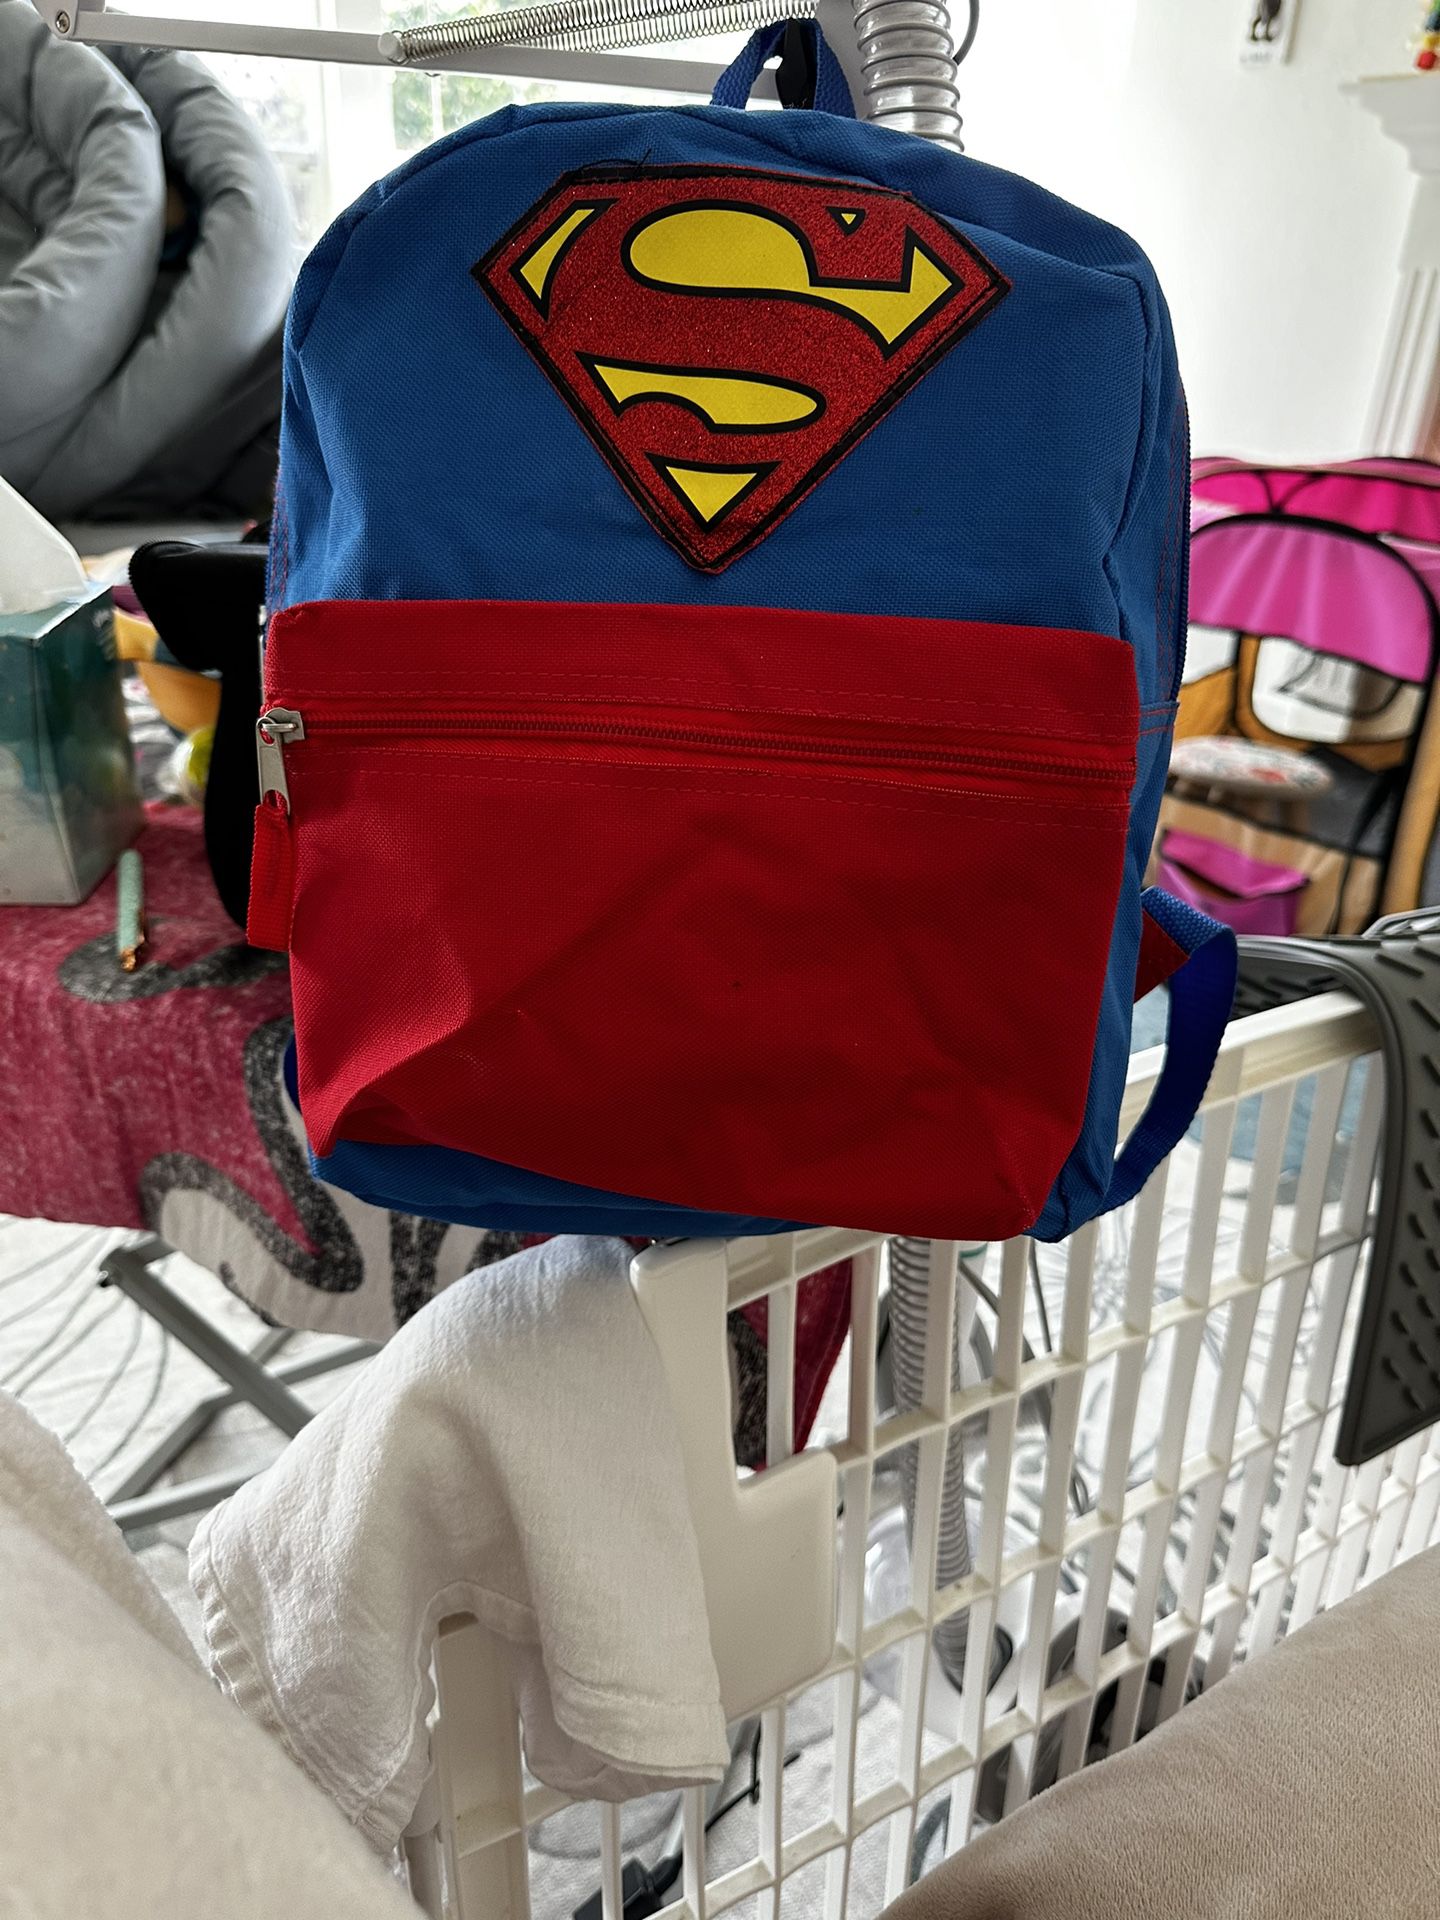 Cute Child Backpack, for school & Hiking etc. 